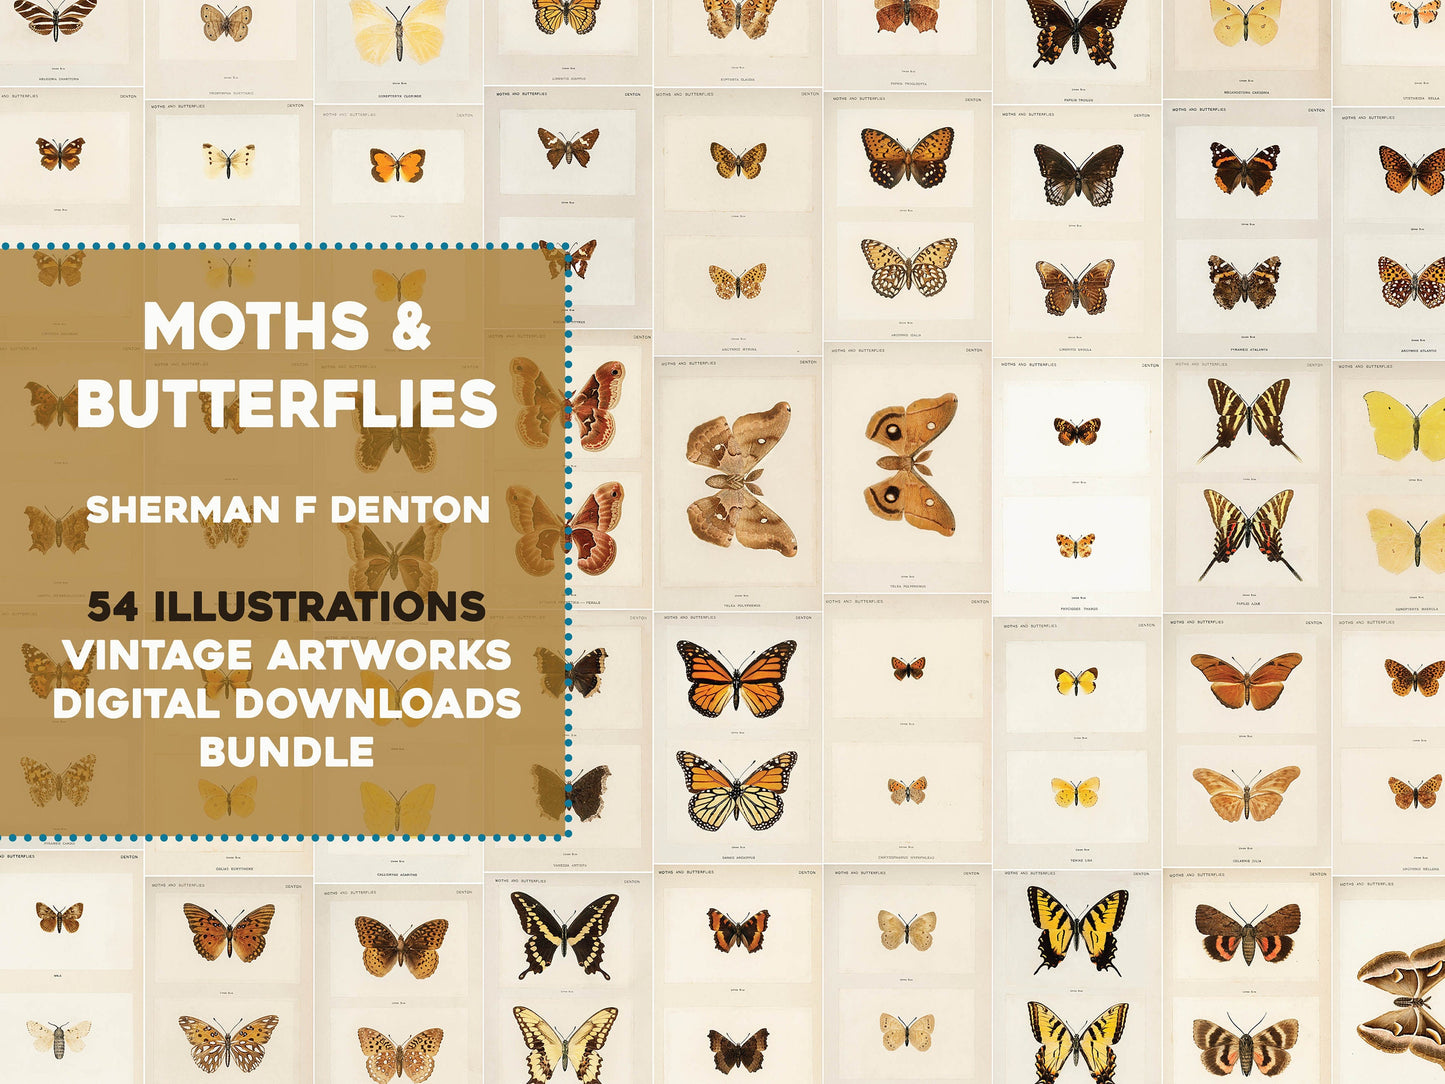 Moths & Butterflies of the United States East of the Rocky Mountains [54 Images]